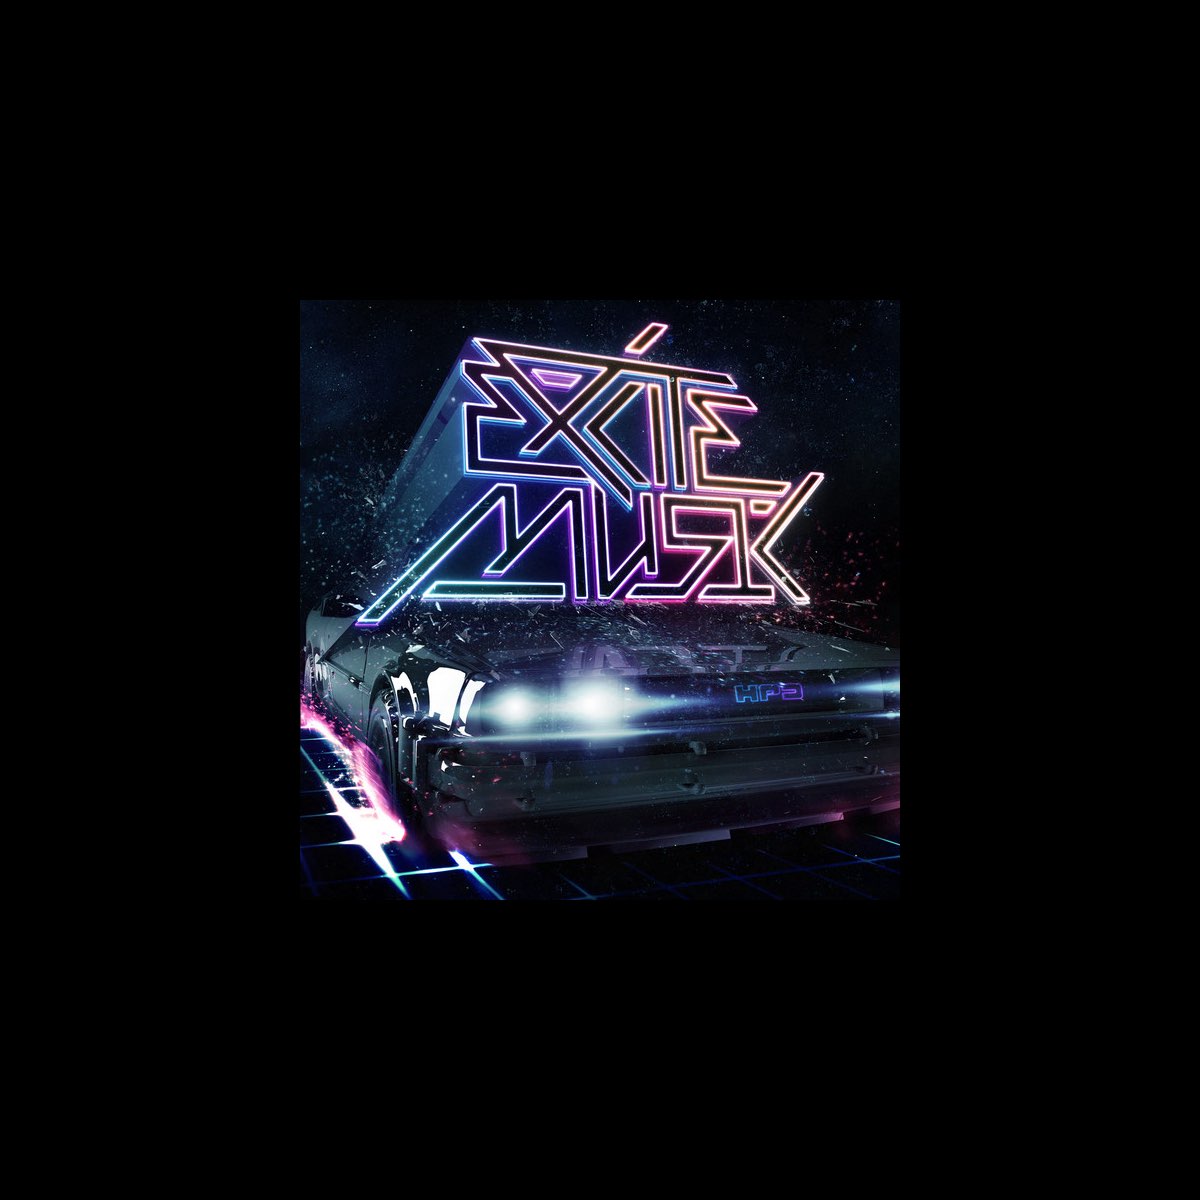 Kat Deluna Porn - Excite Music! - Single by Hot Pink Delorean on Apple Music